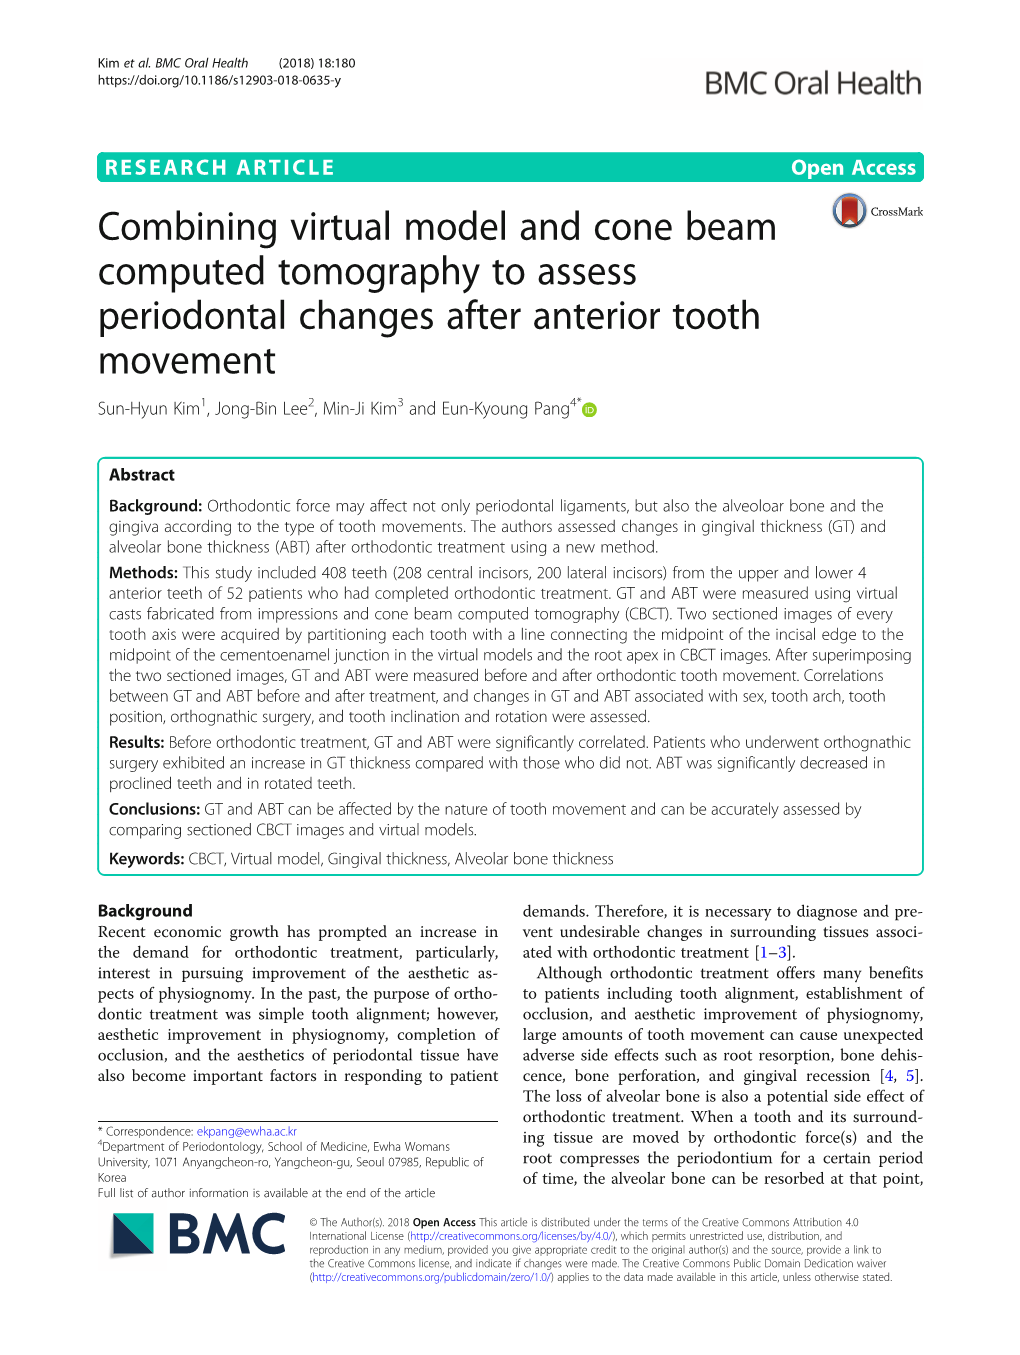 Combining Virtual Model and Cone Beam Computed Tomography To